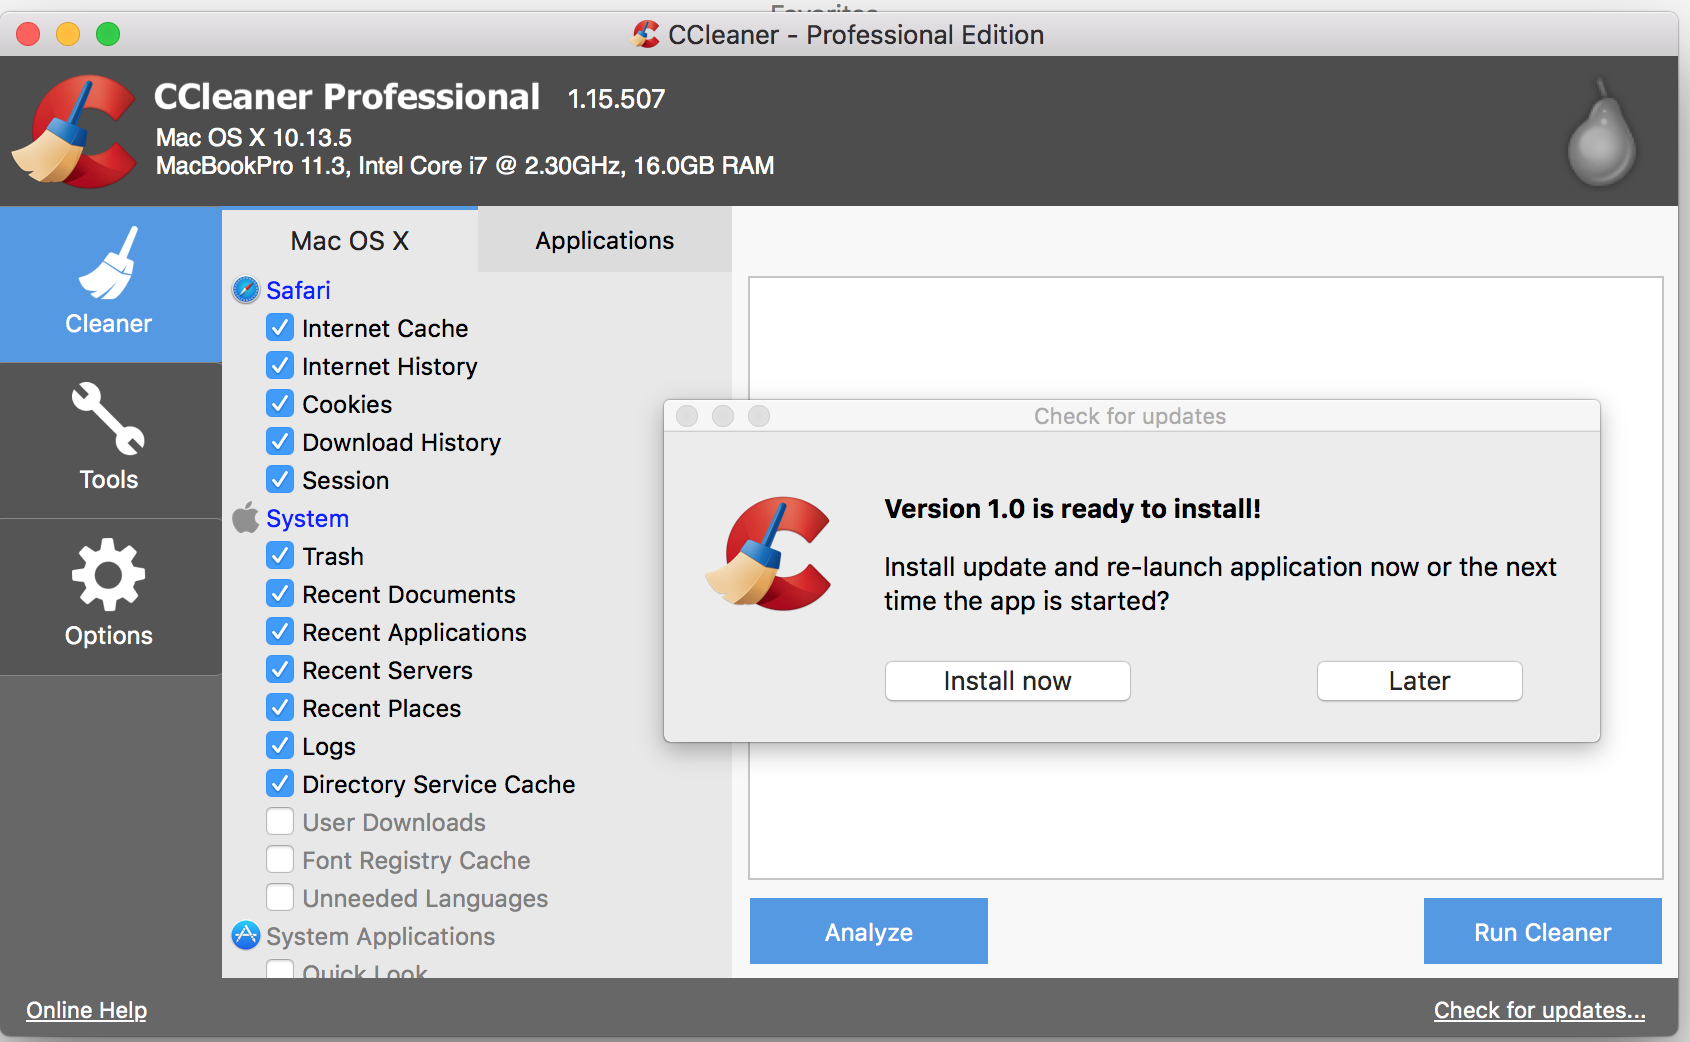 CCleaner Pro Crack 6.05.10110 With License Key Full Latest Version Download 2022